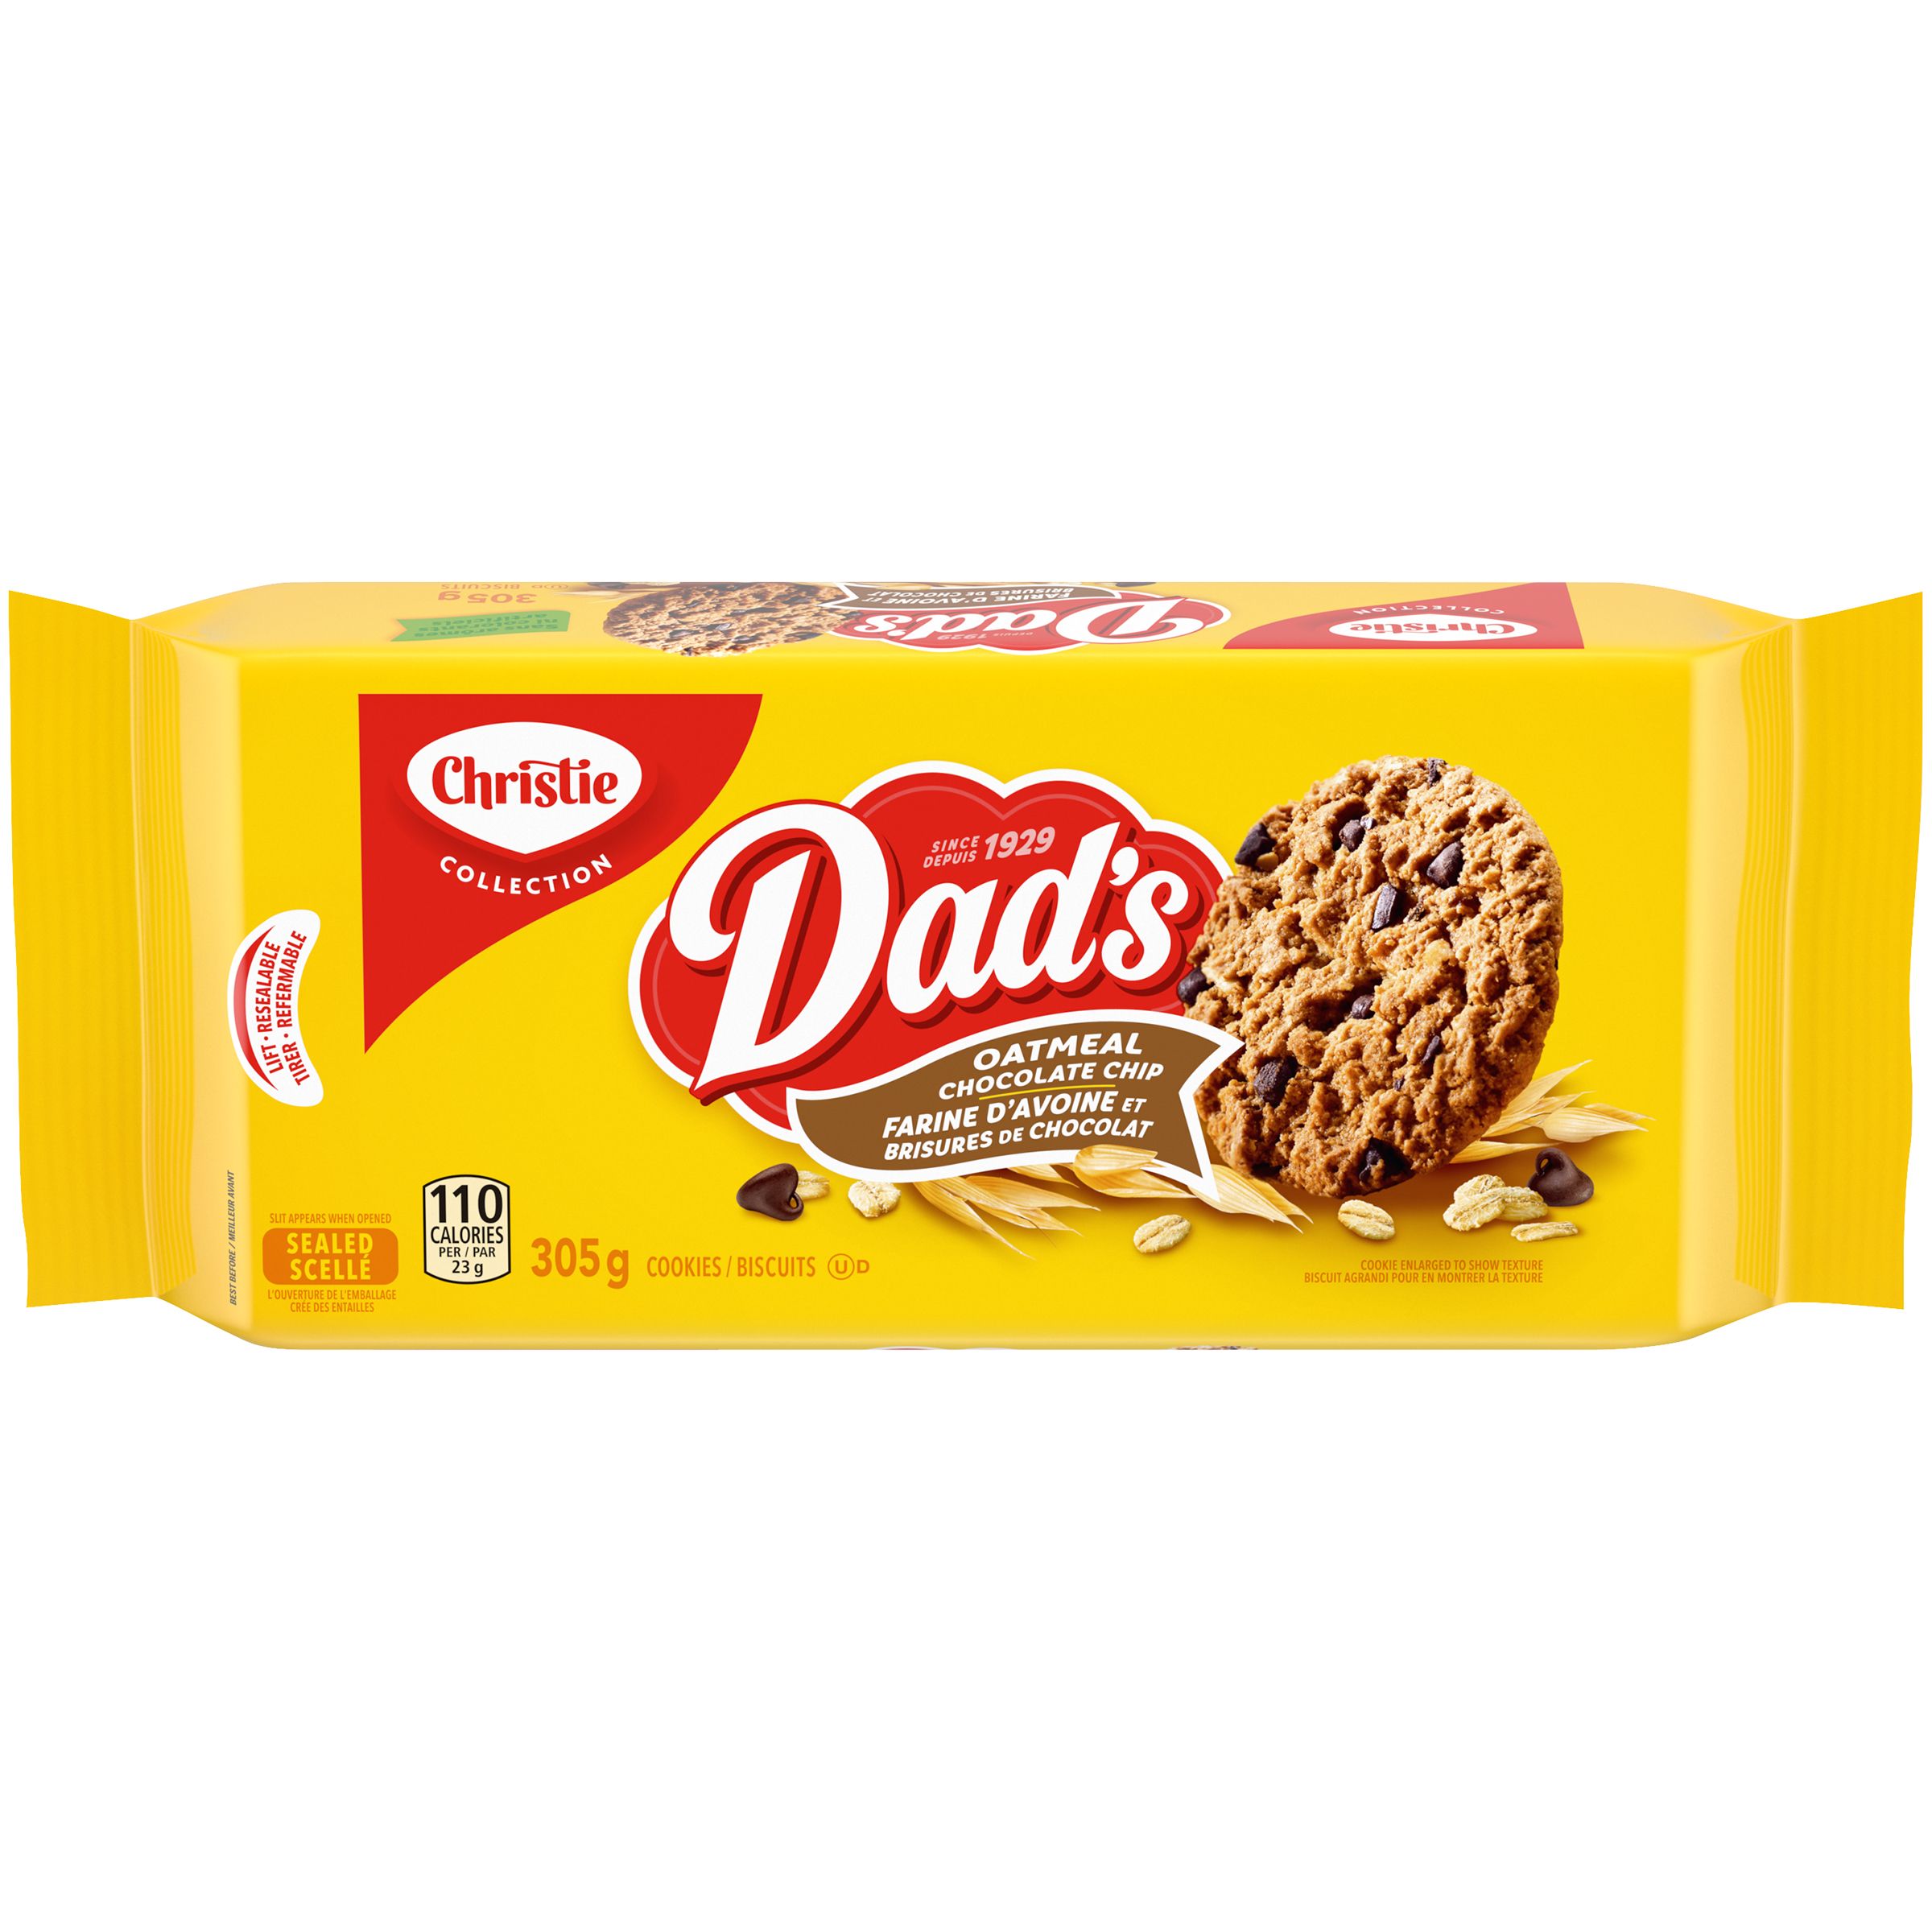 Dads Oatmeal Chocolate Chip Cookies 305 G